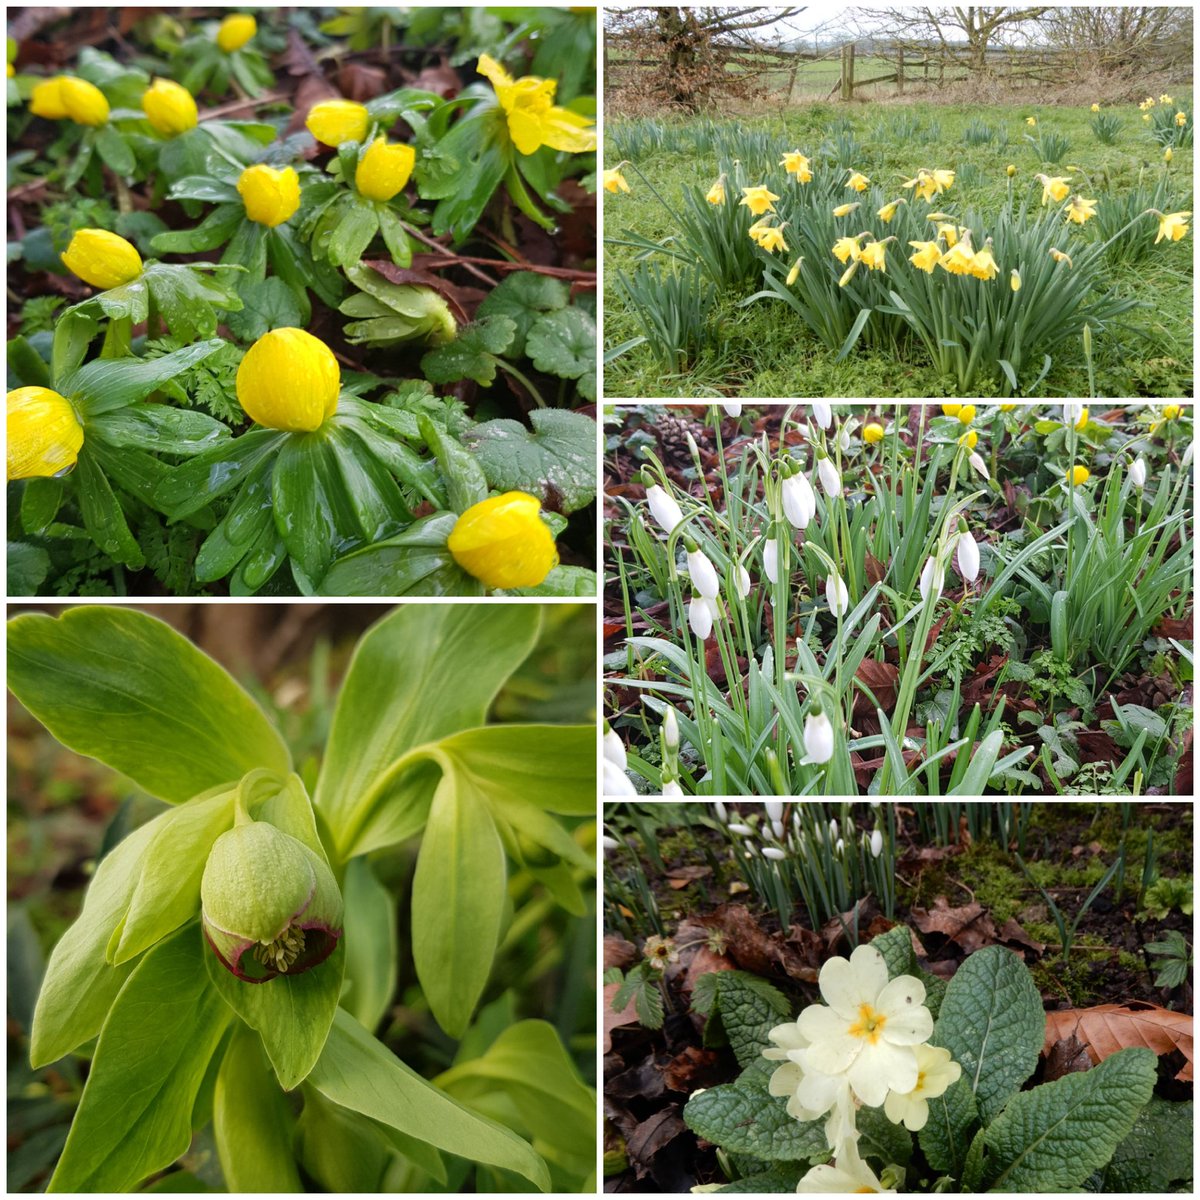 #wildflowerhour #TheWinter10 #365DaysWild #Chilterns  in Buckinghamshire this week : cow parsnip, bee nettle, spotted dead nettle, sow thistle, celandine, winter aconite, daffodil, snowdrop, primrose and hellebore